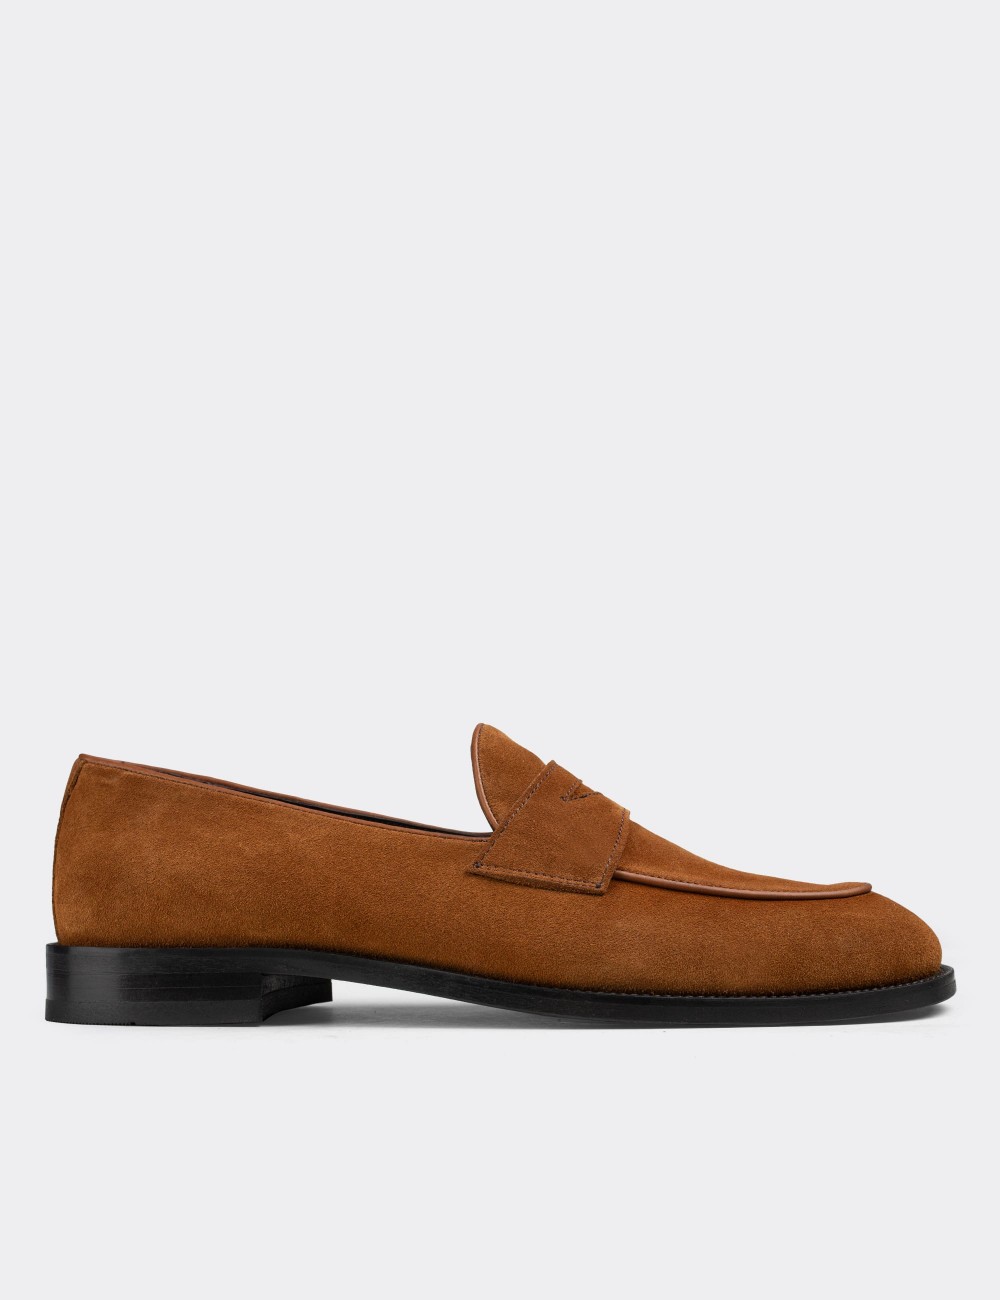 Tan Suede Leather Loafers - 01845MTBAN01